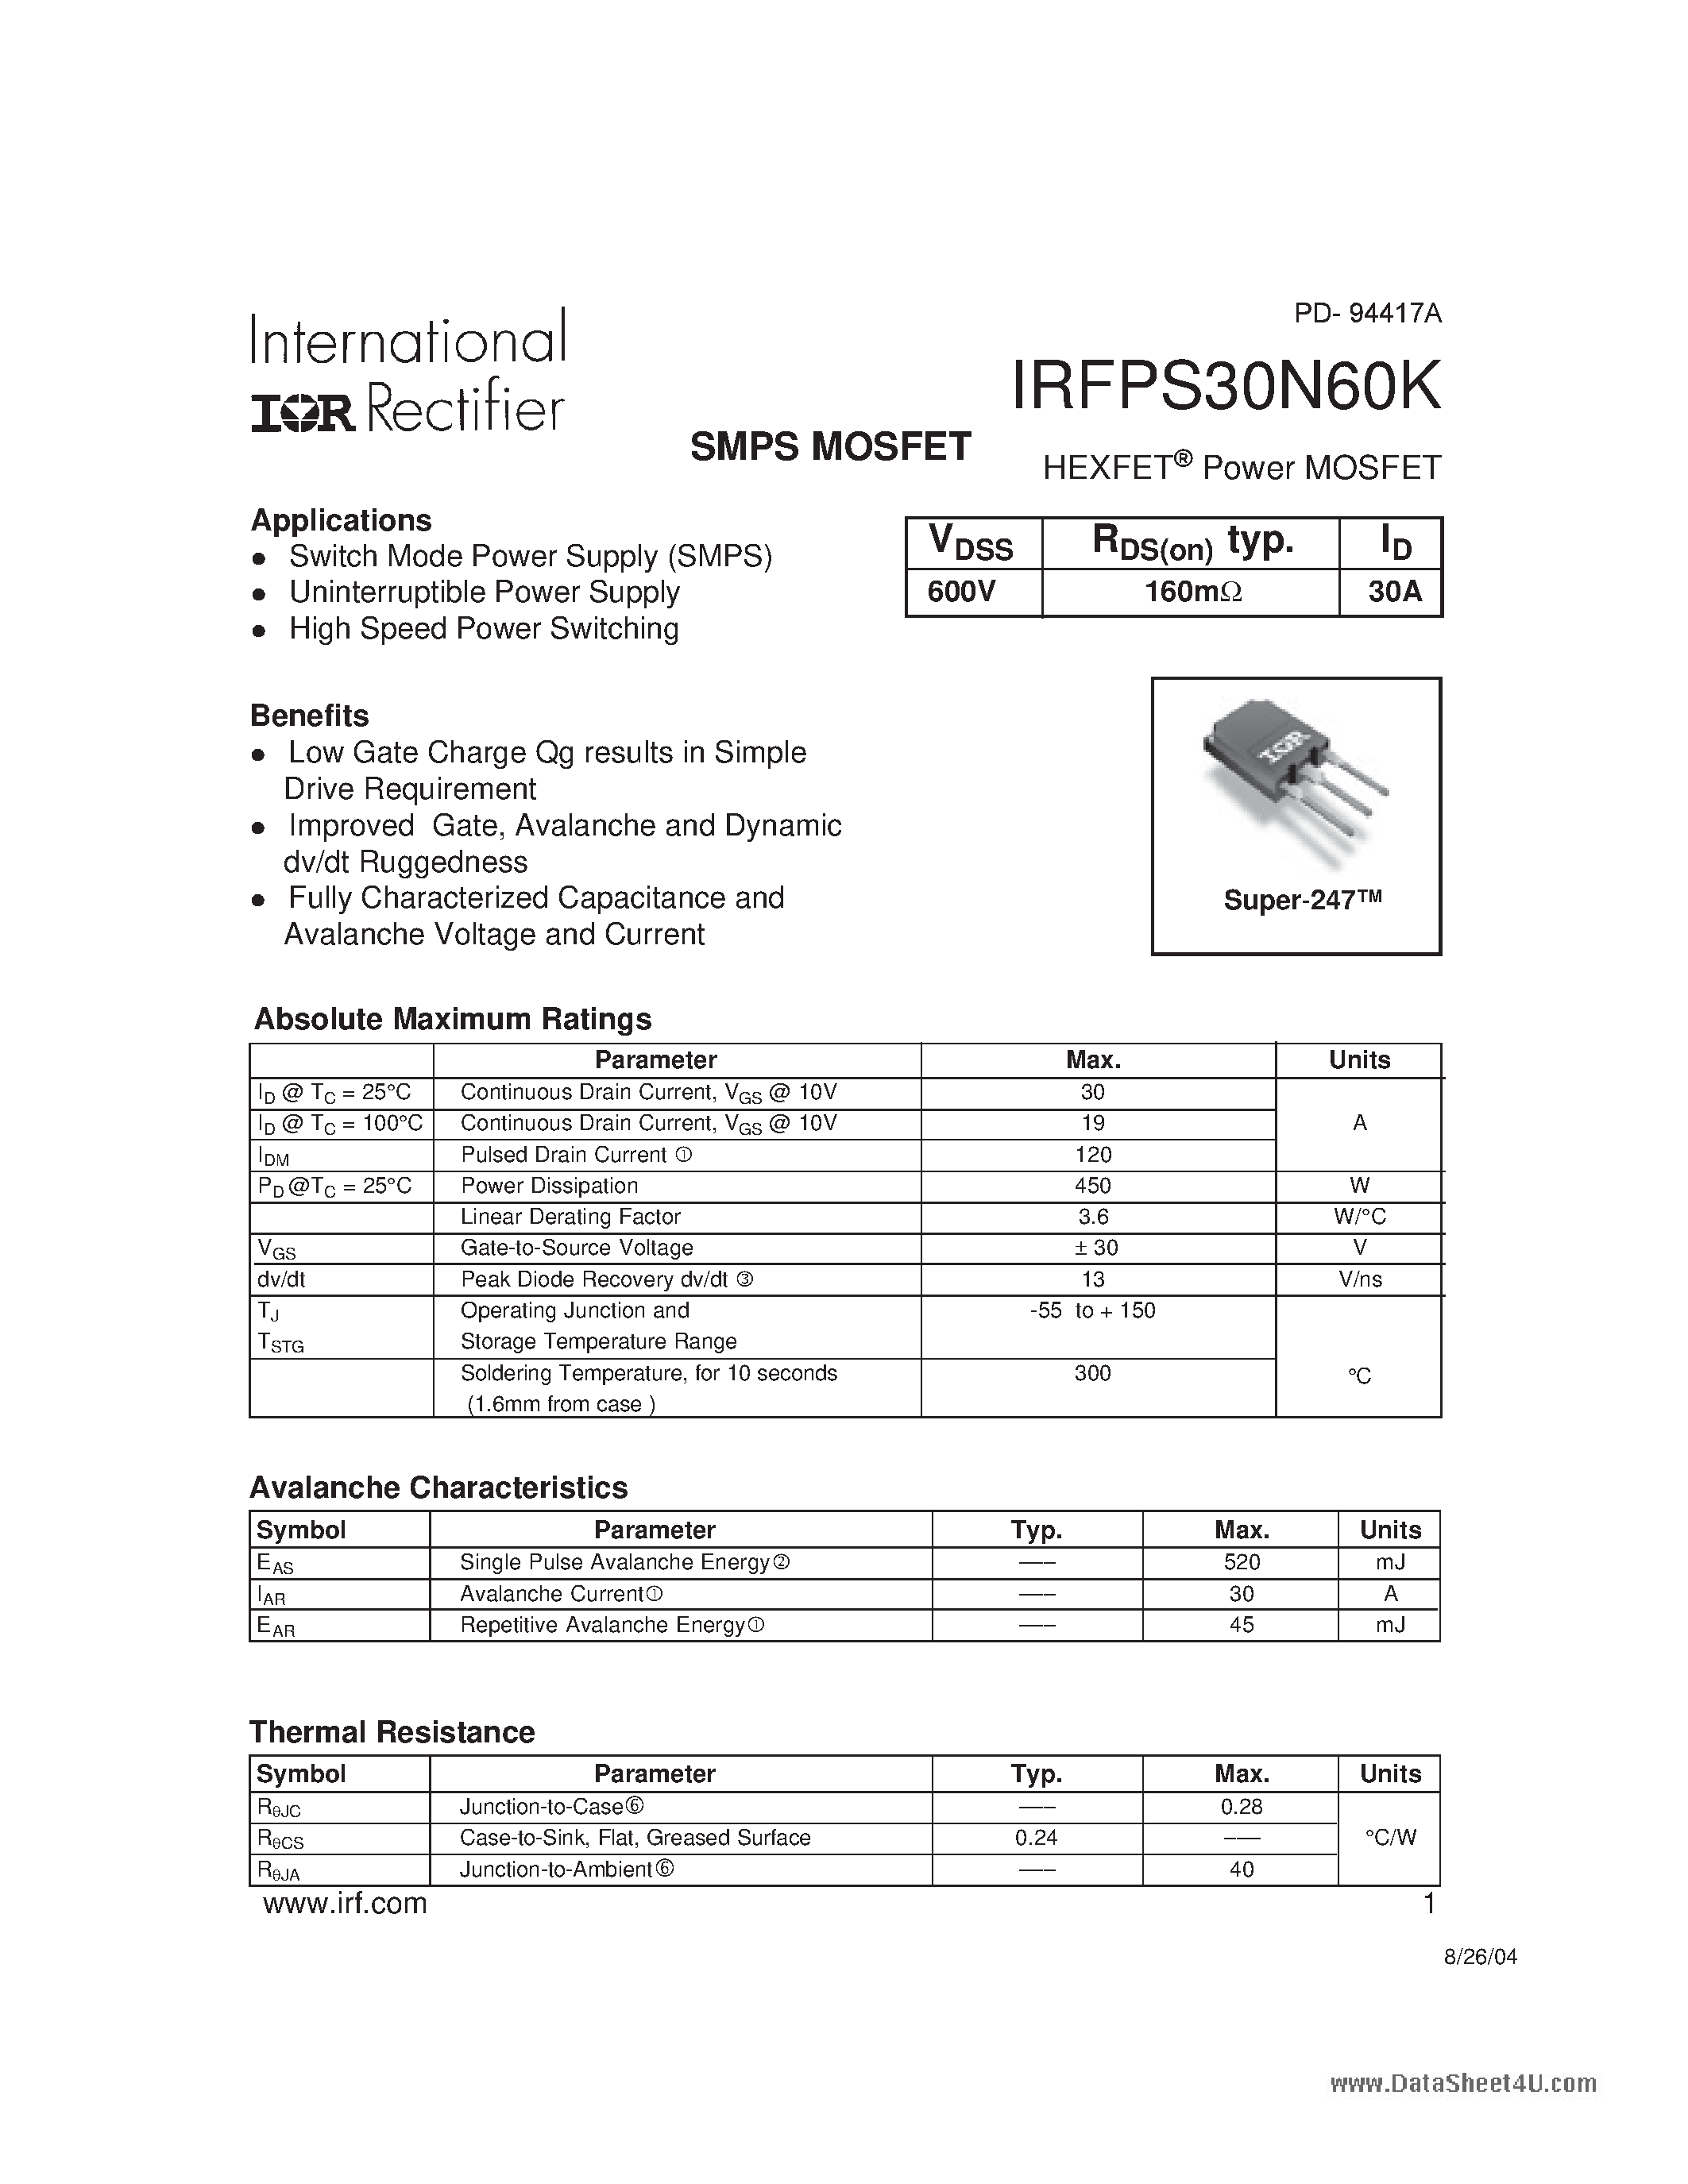 Даташит IRFPS30N60K - SMPS MOSFET страница 1